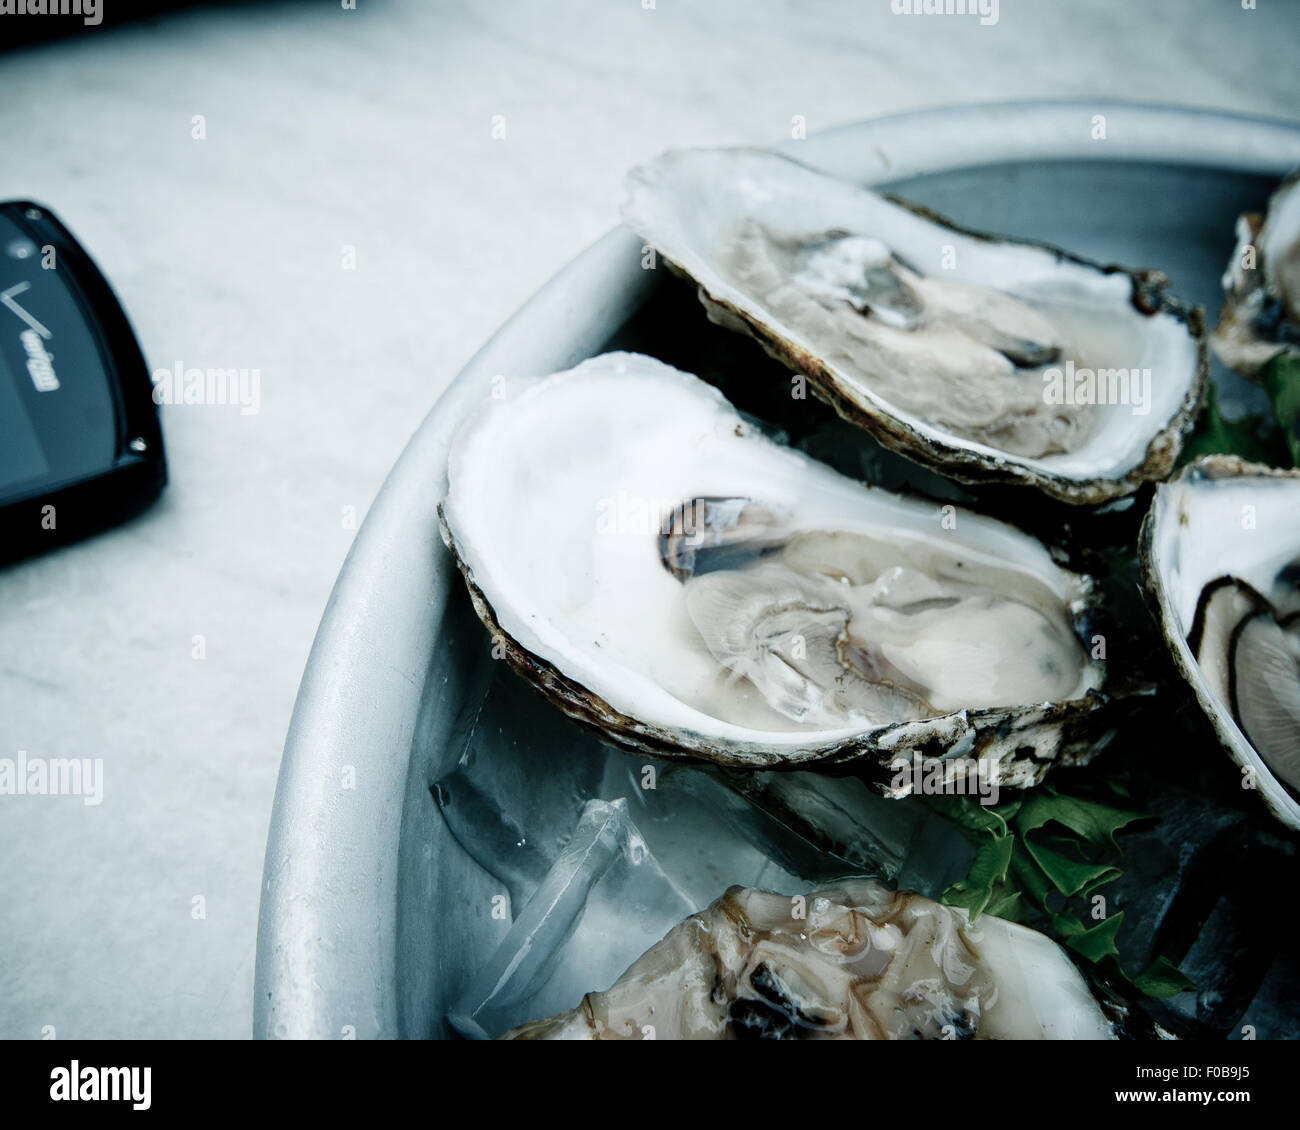 Oysters on a half shell. Stock Photo